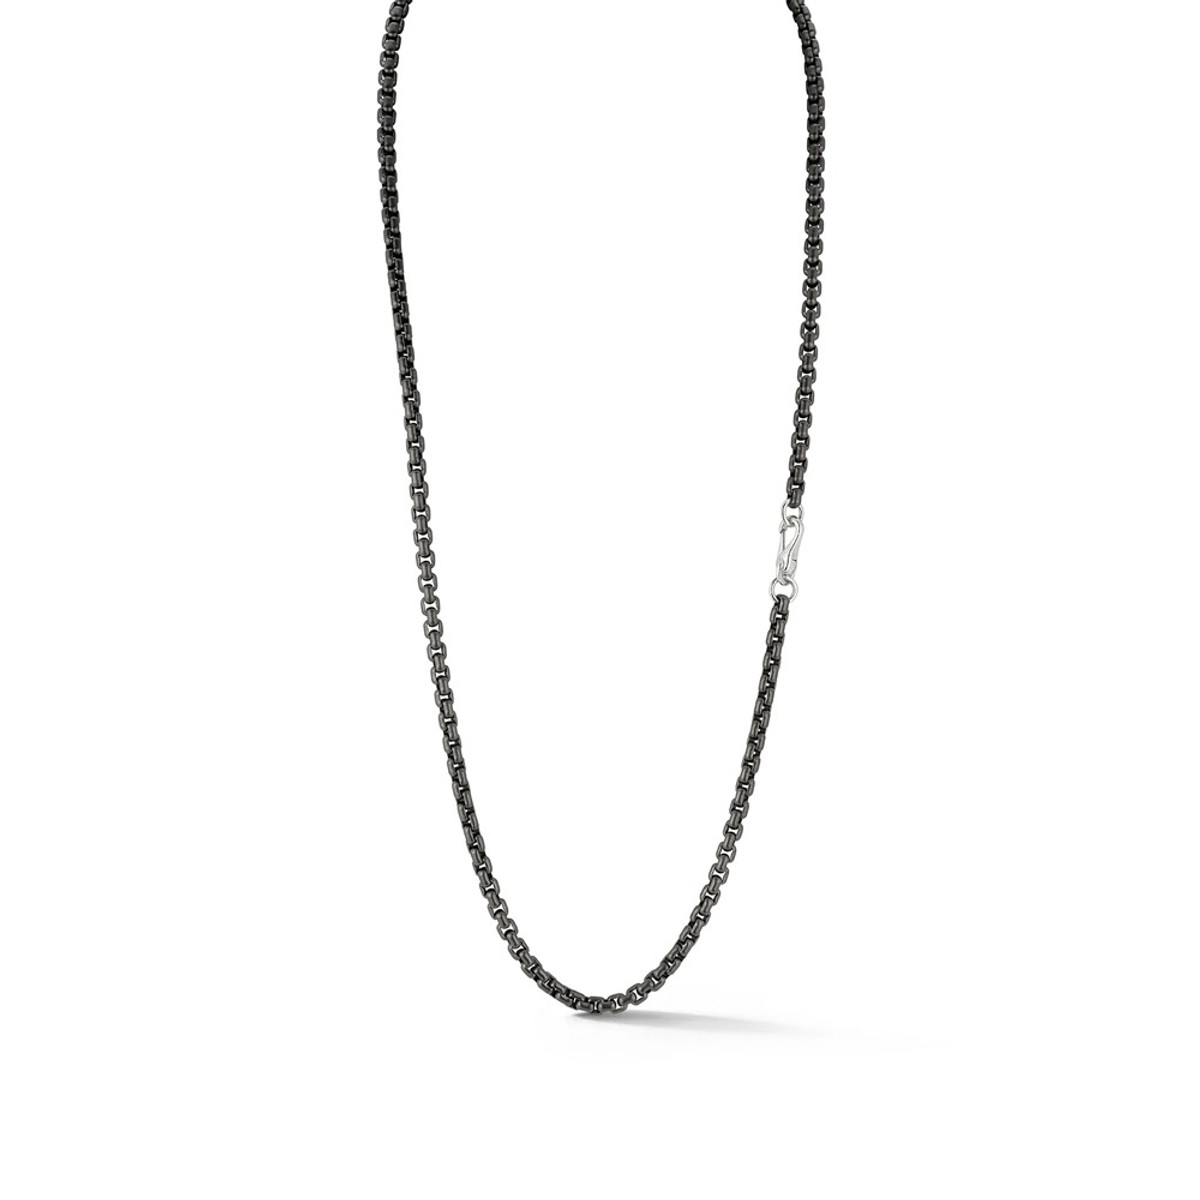 Walters Faith Garnett Sterling Silver Chain Link Necklace with Sterling Silver Clasp-56419 Product Image